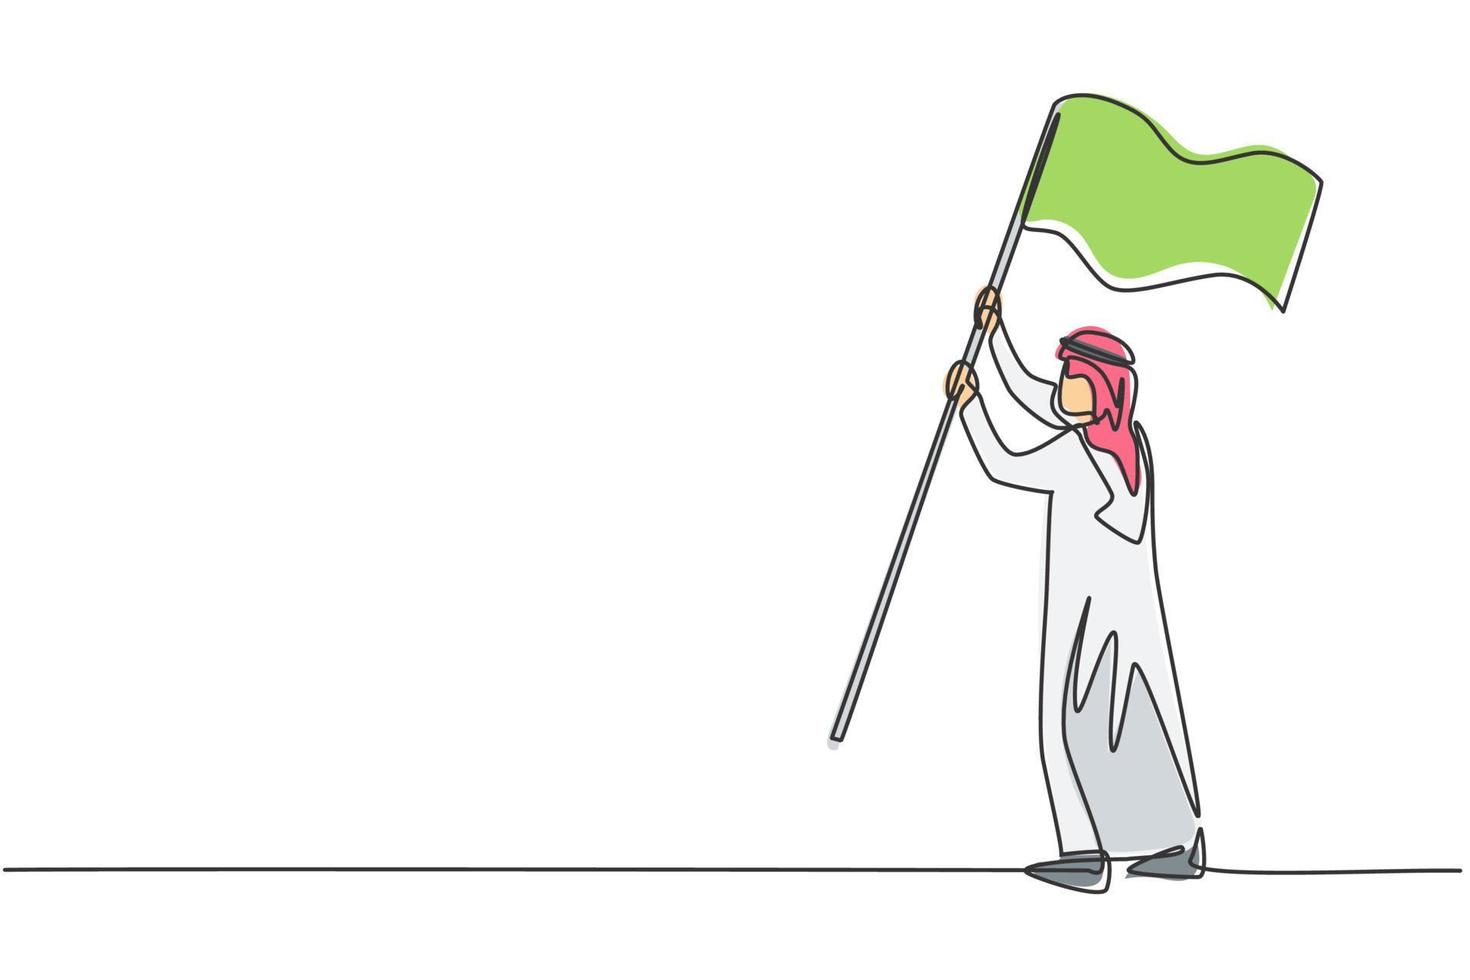 Single one line drawing of young Arab business man holding winning flag as achievement target. Business mission minimal metaphor concept. Modern continuous line draw design graphic vector illustration